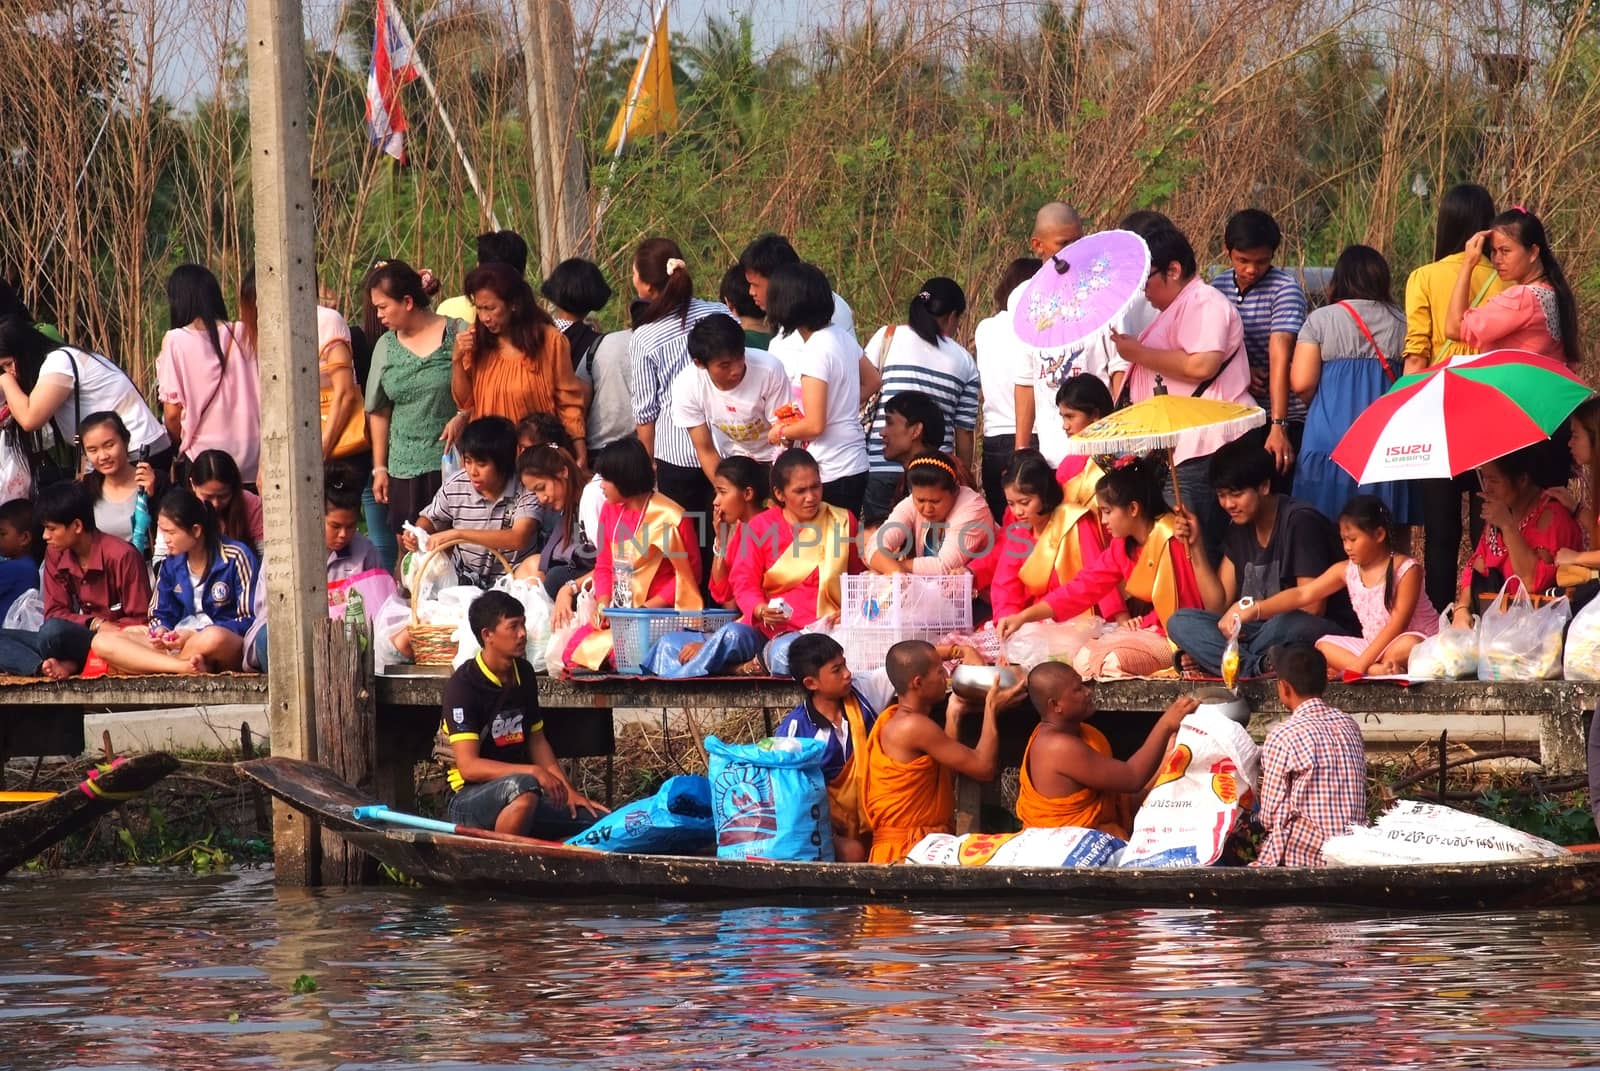 Tuk baat Phra Roi River Festival by ideation90